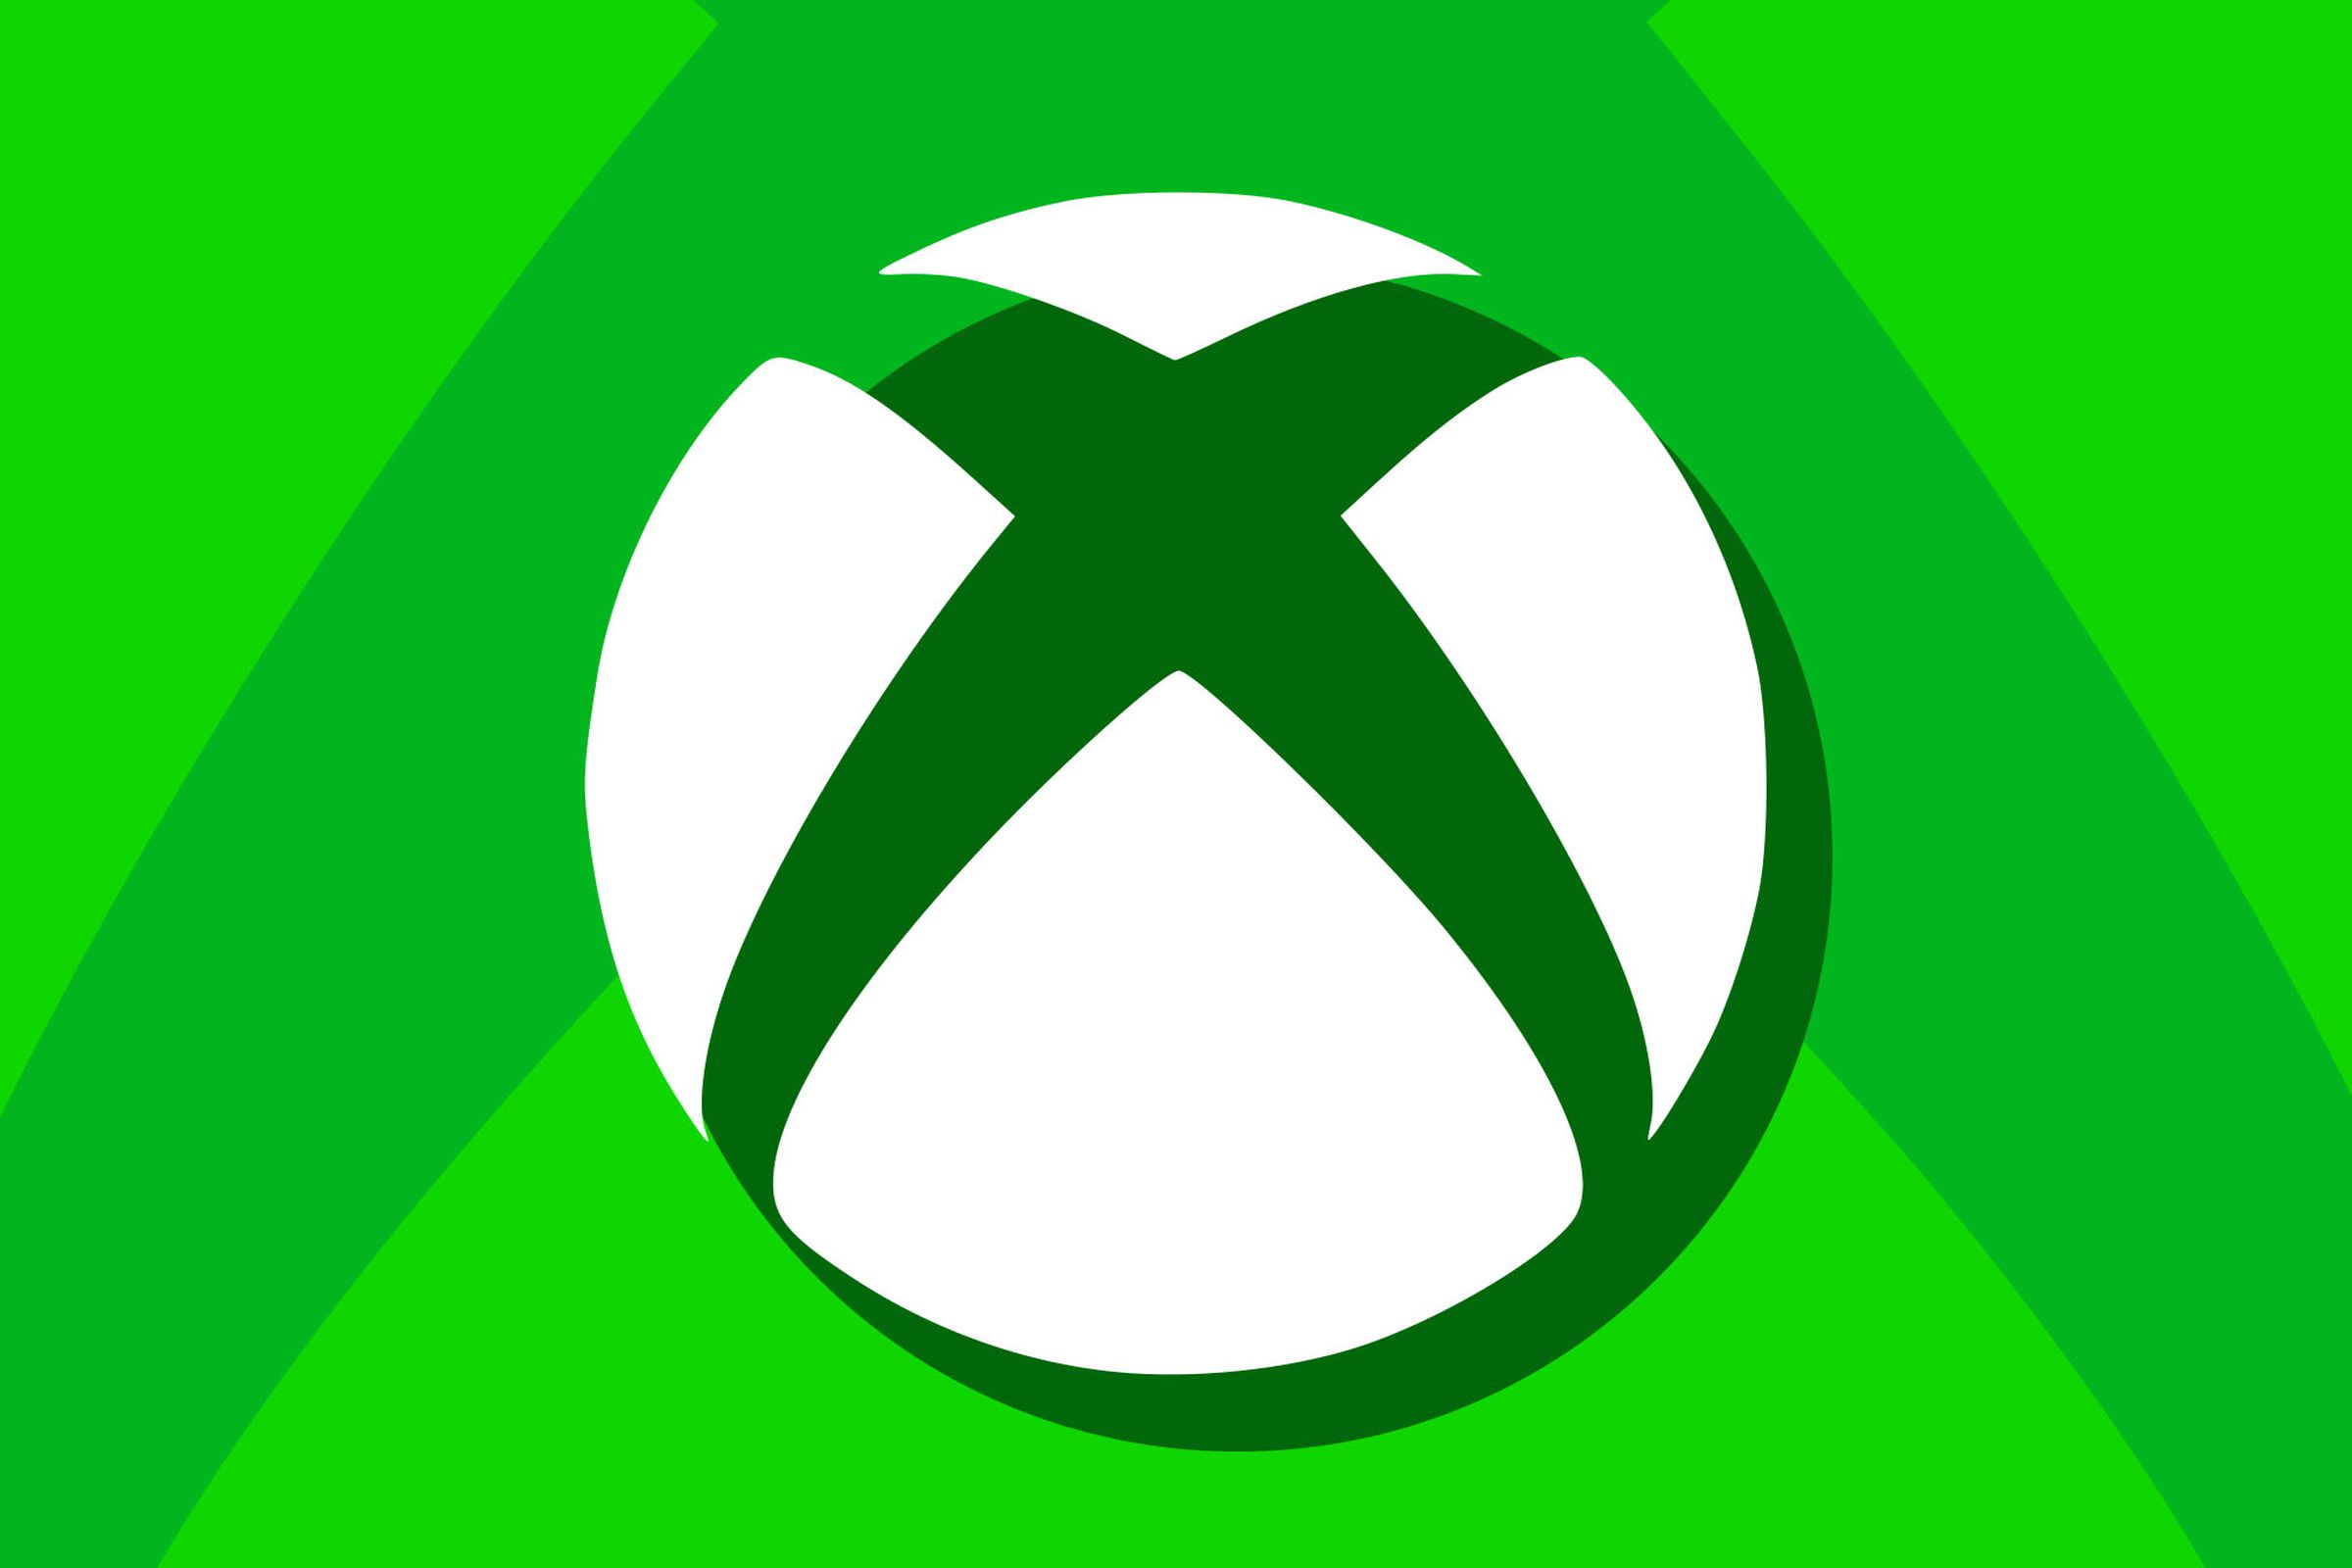 Xbox chief confirms more games are coming to other platforms